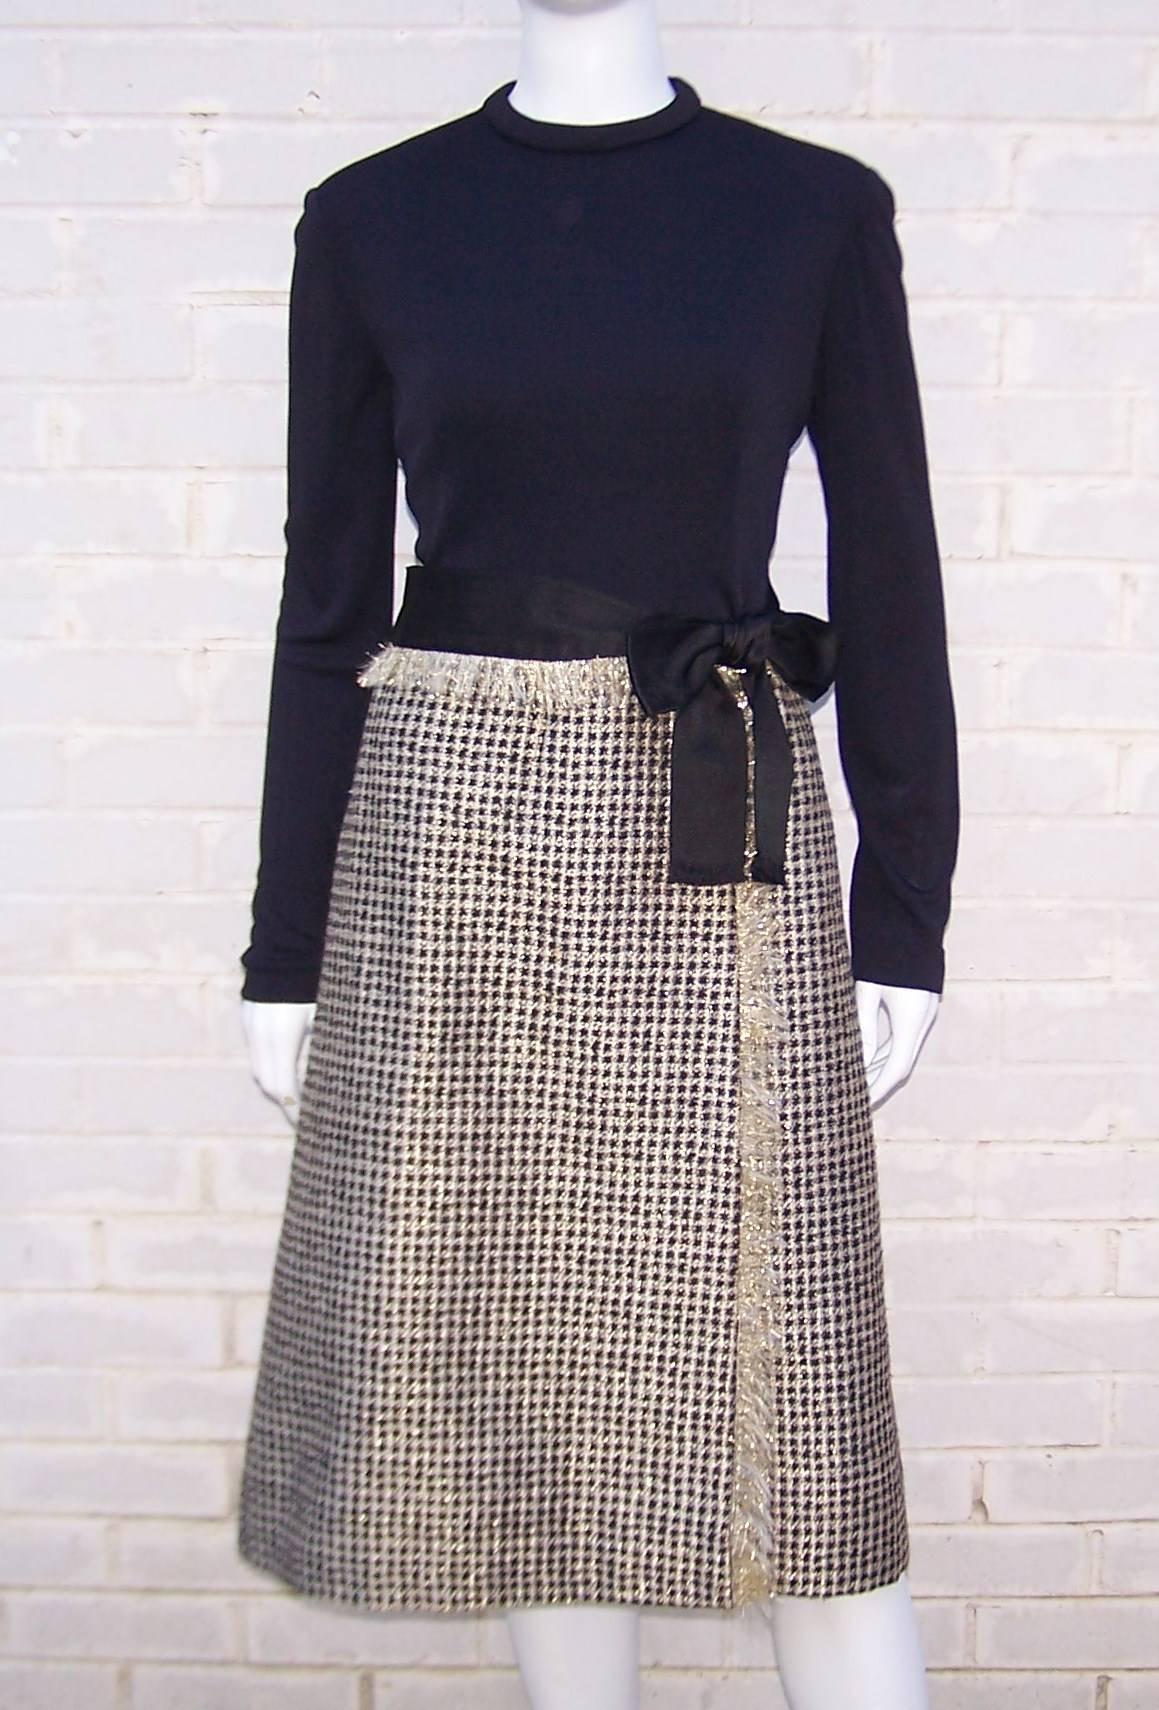 It's all about the fabrics for Mr. Weinberg and this dress is an elegant example.  Wool black and gold houndstooth is expertly mixed with a black jersey bodice to create an understated dress with just the right amount of glam to make it perfect for